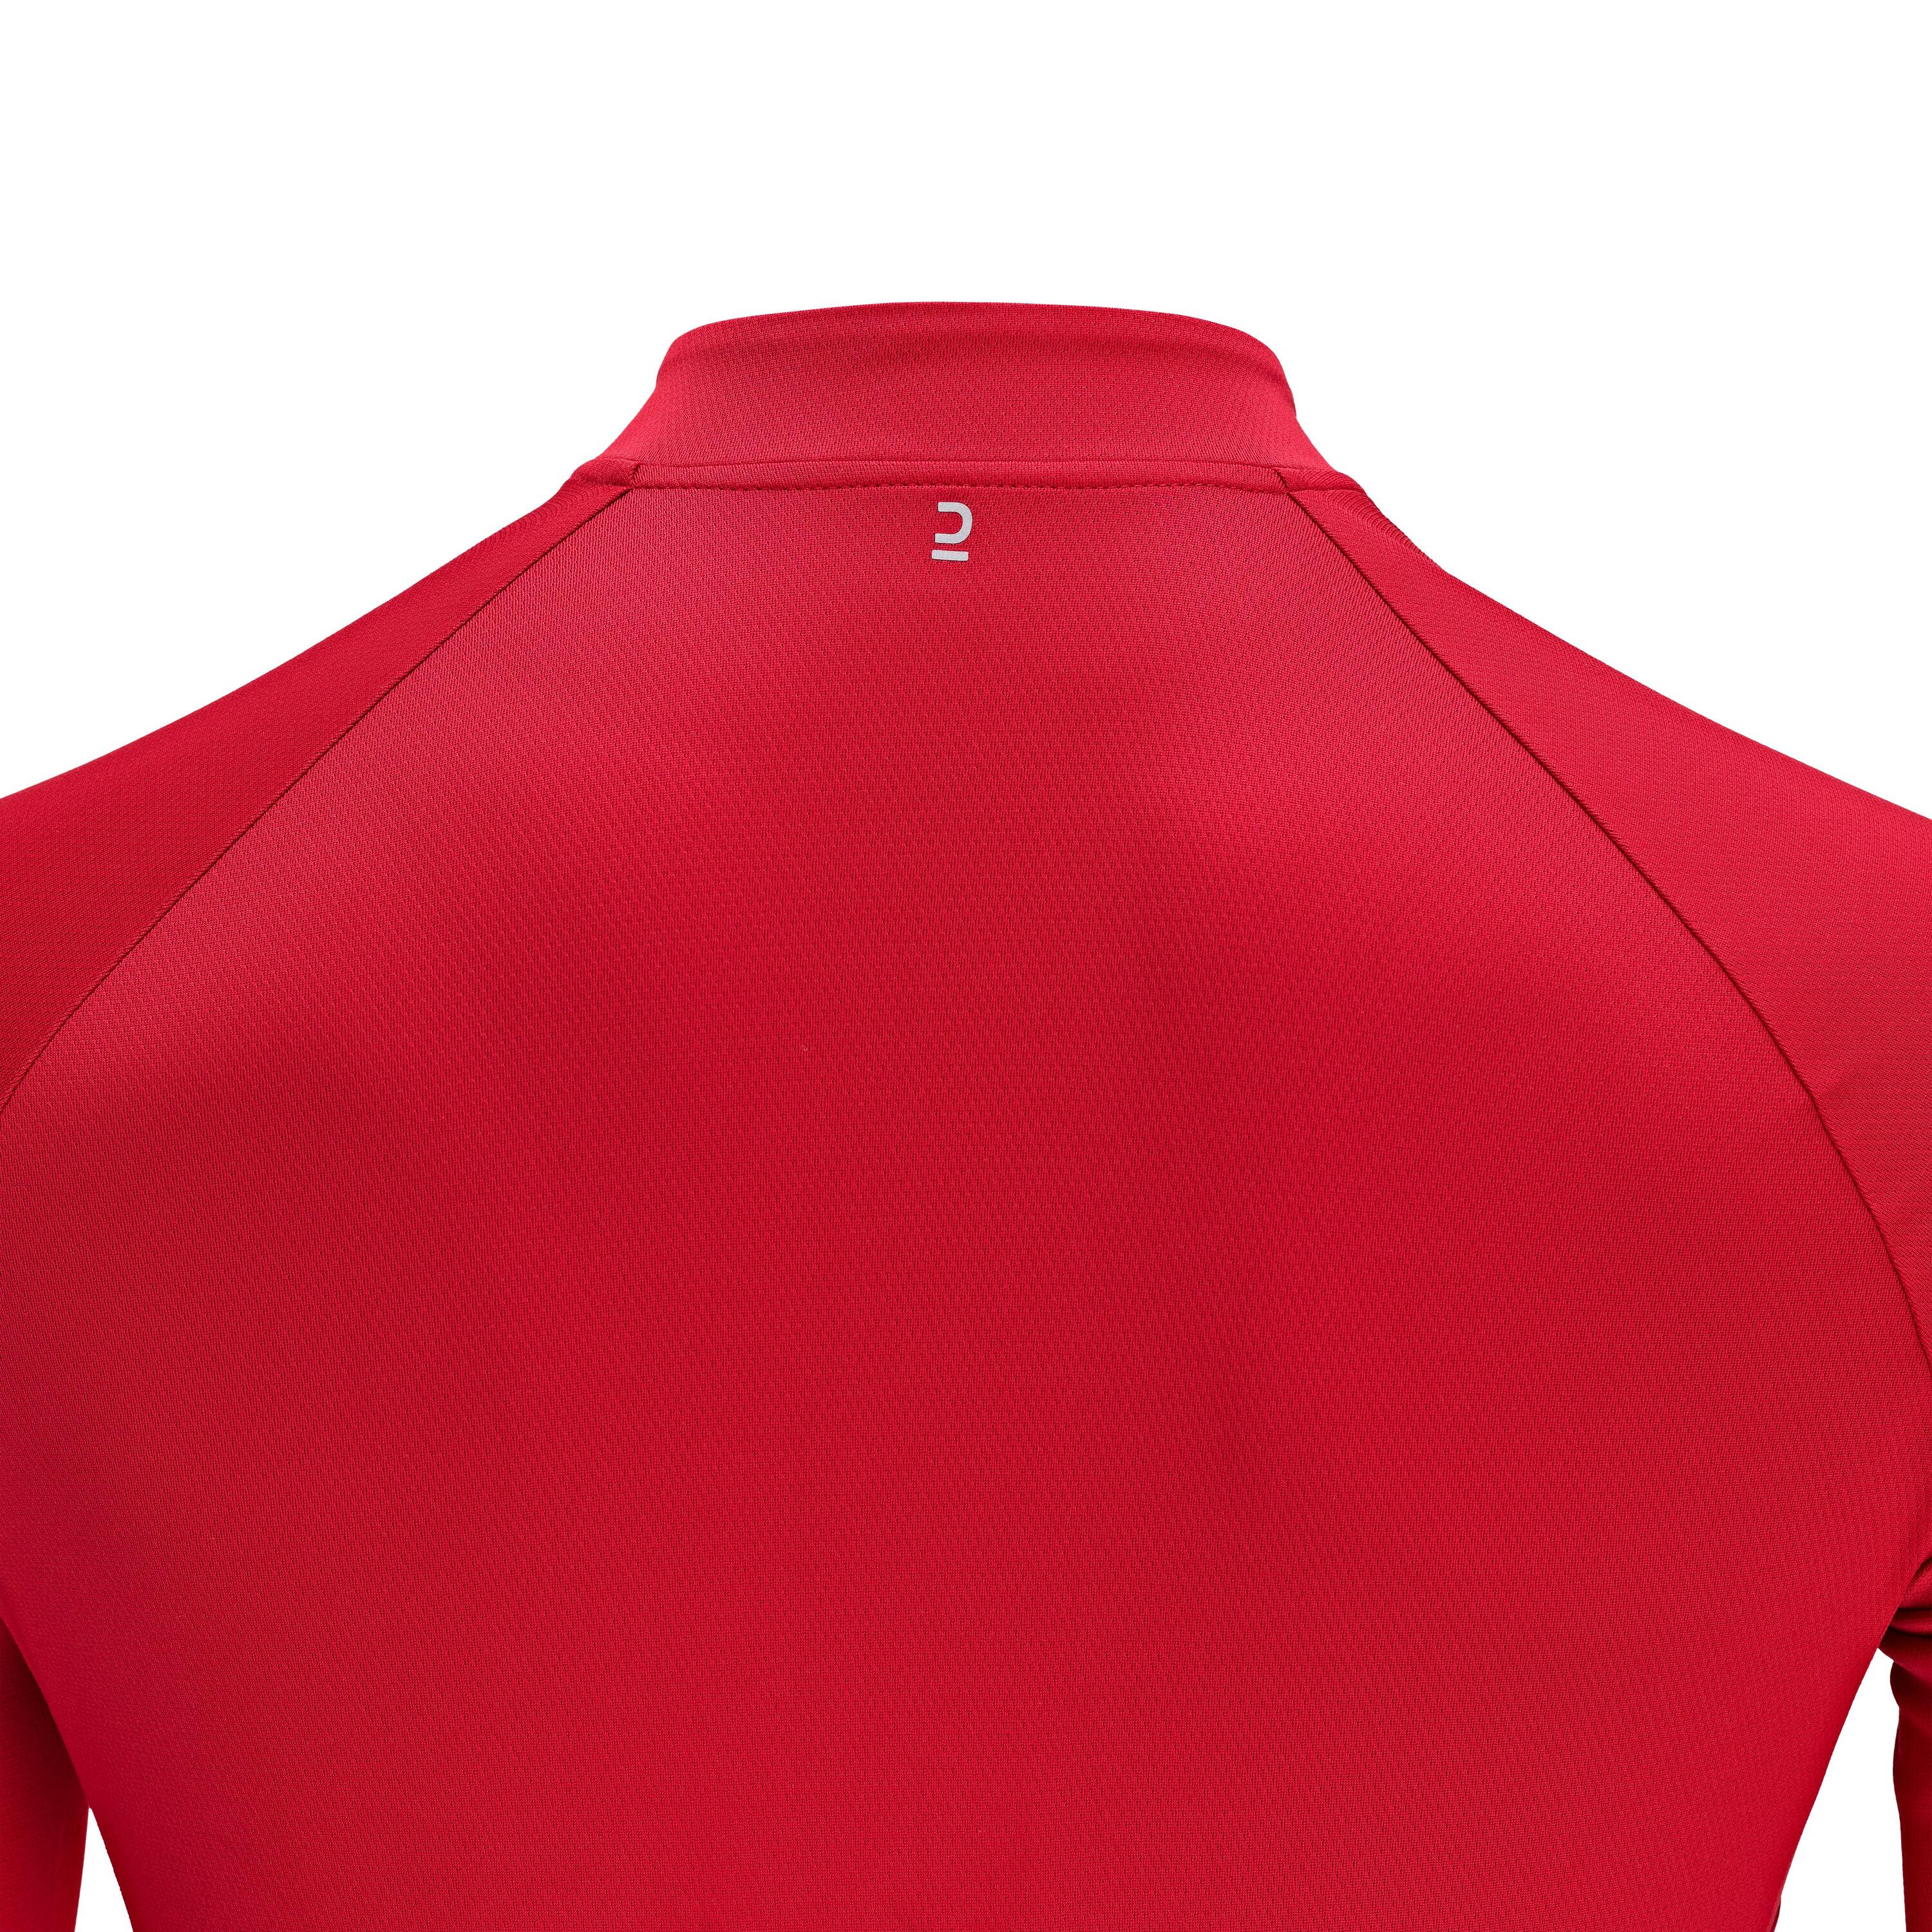 Men's Anti-UV Long-Sleeved Road Cycling Summer Jersey RC100 - Red 6/7